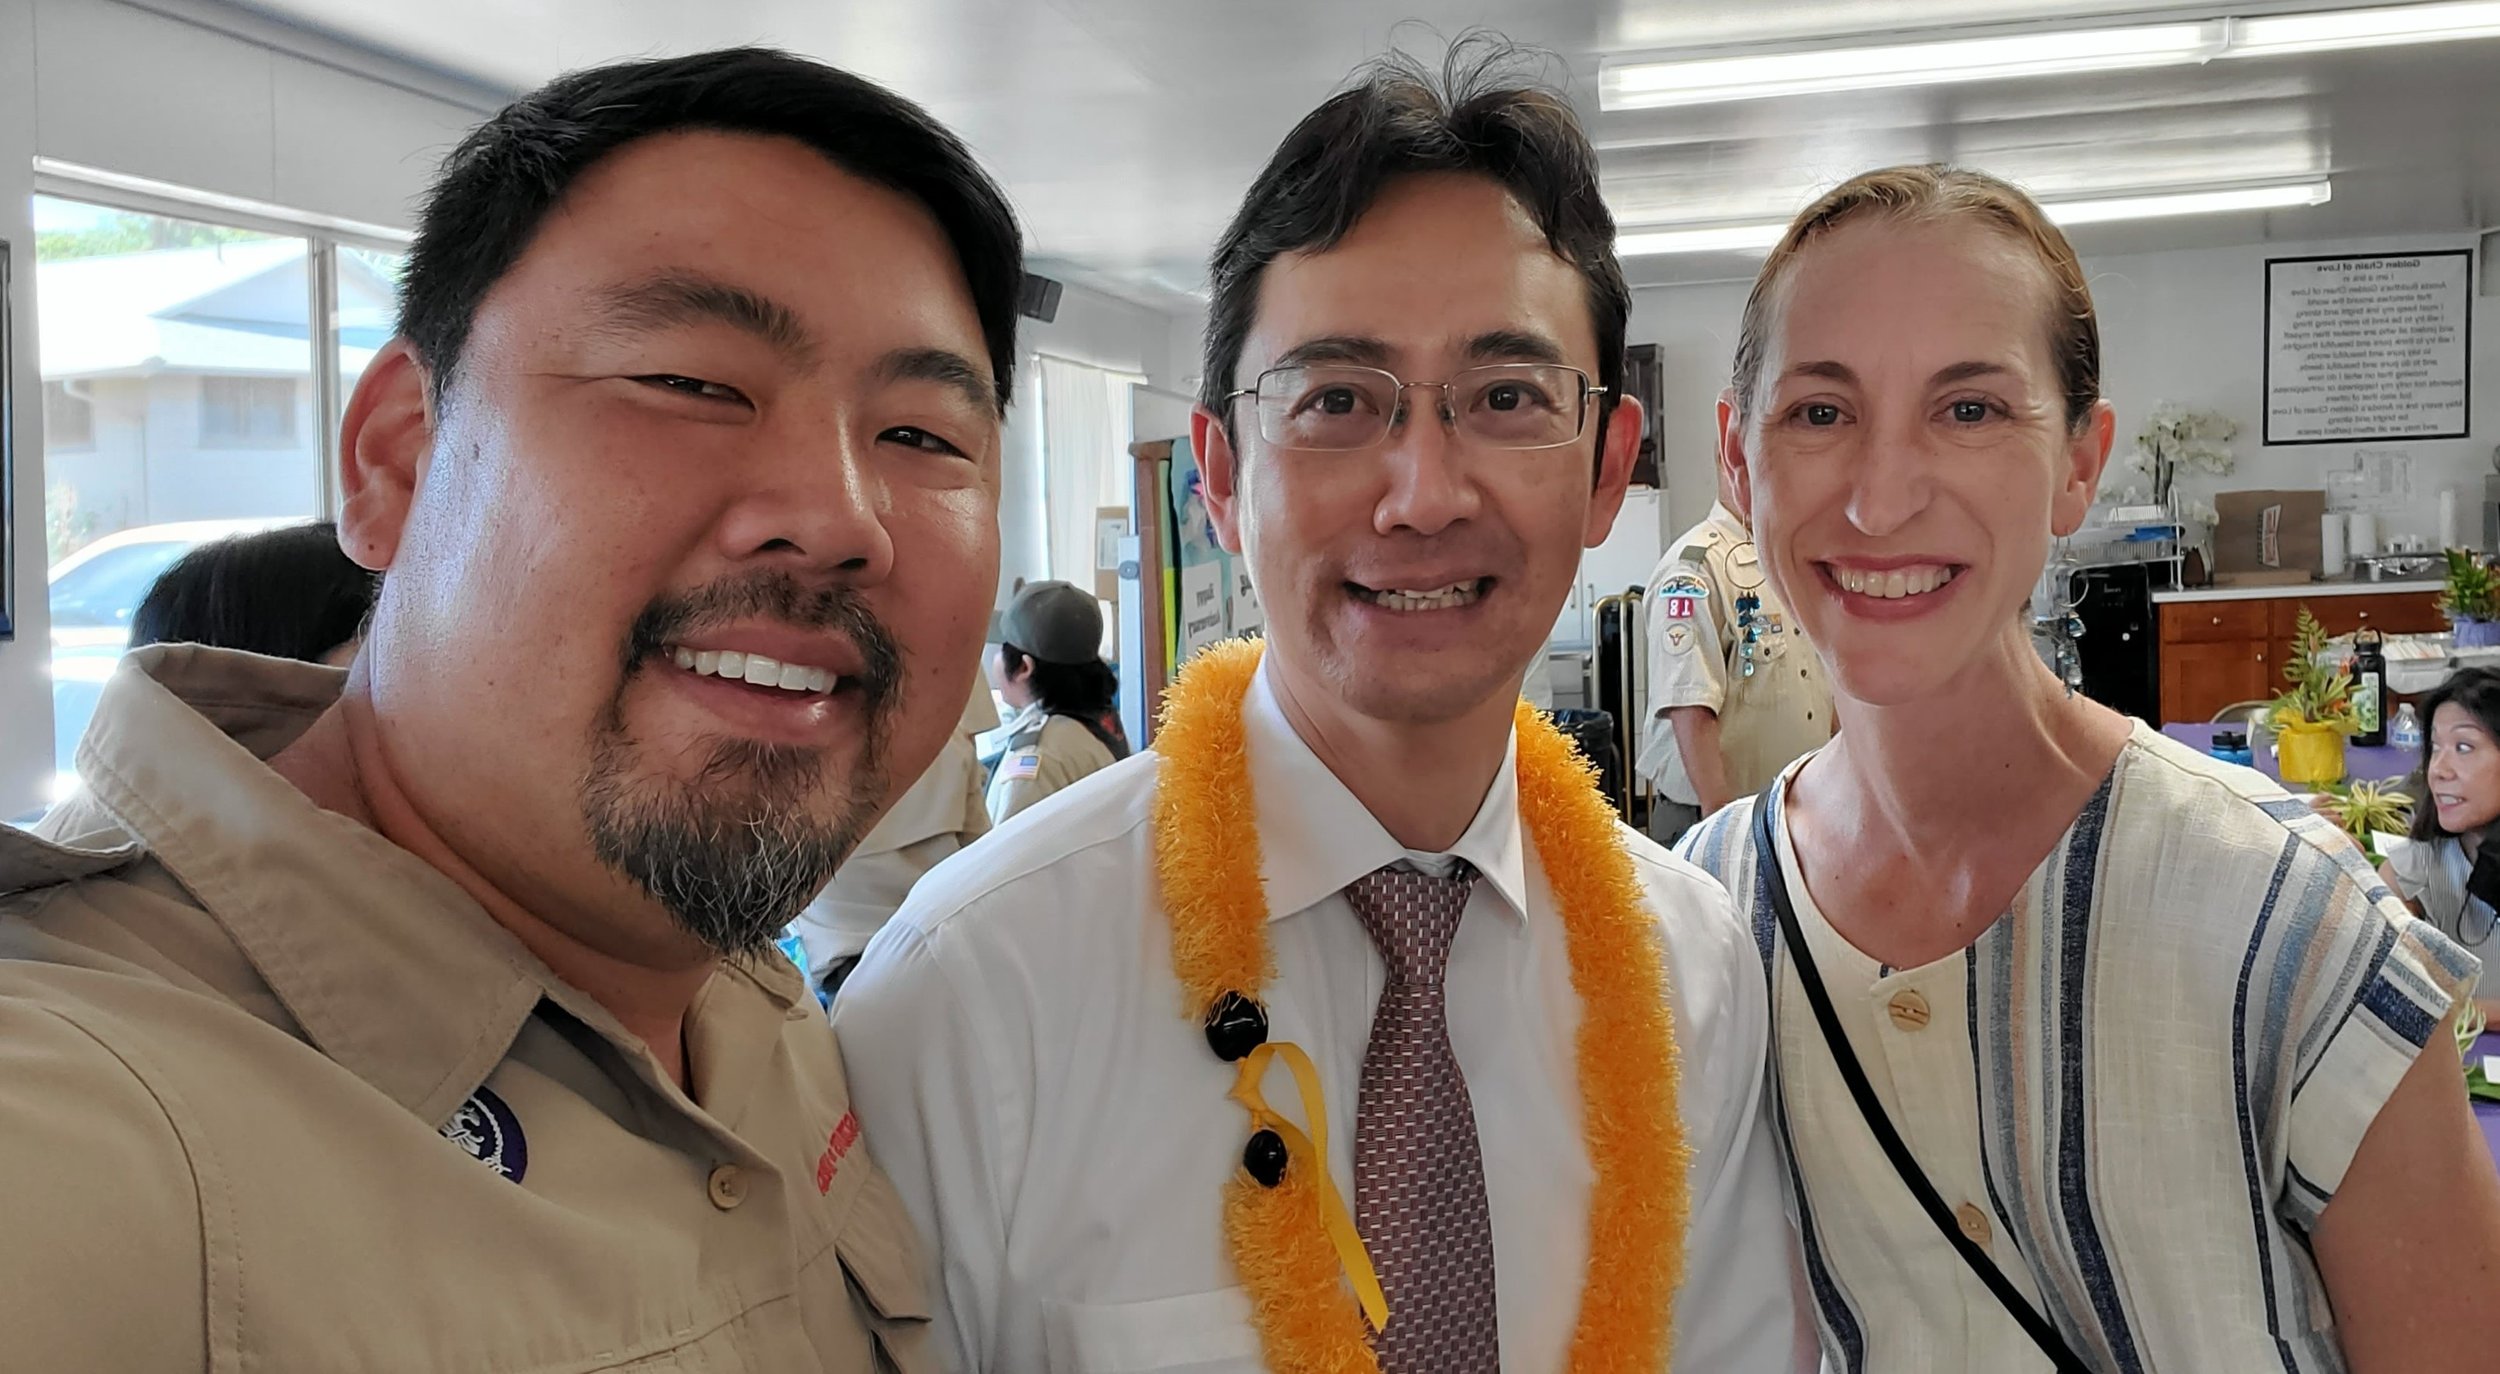   Katie and Sean Higuchi with Rev. Umitani who performed part of their wedding ceremony  